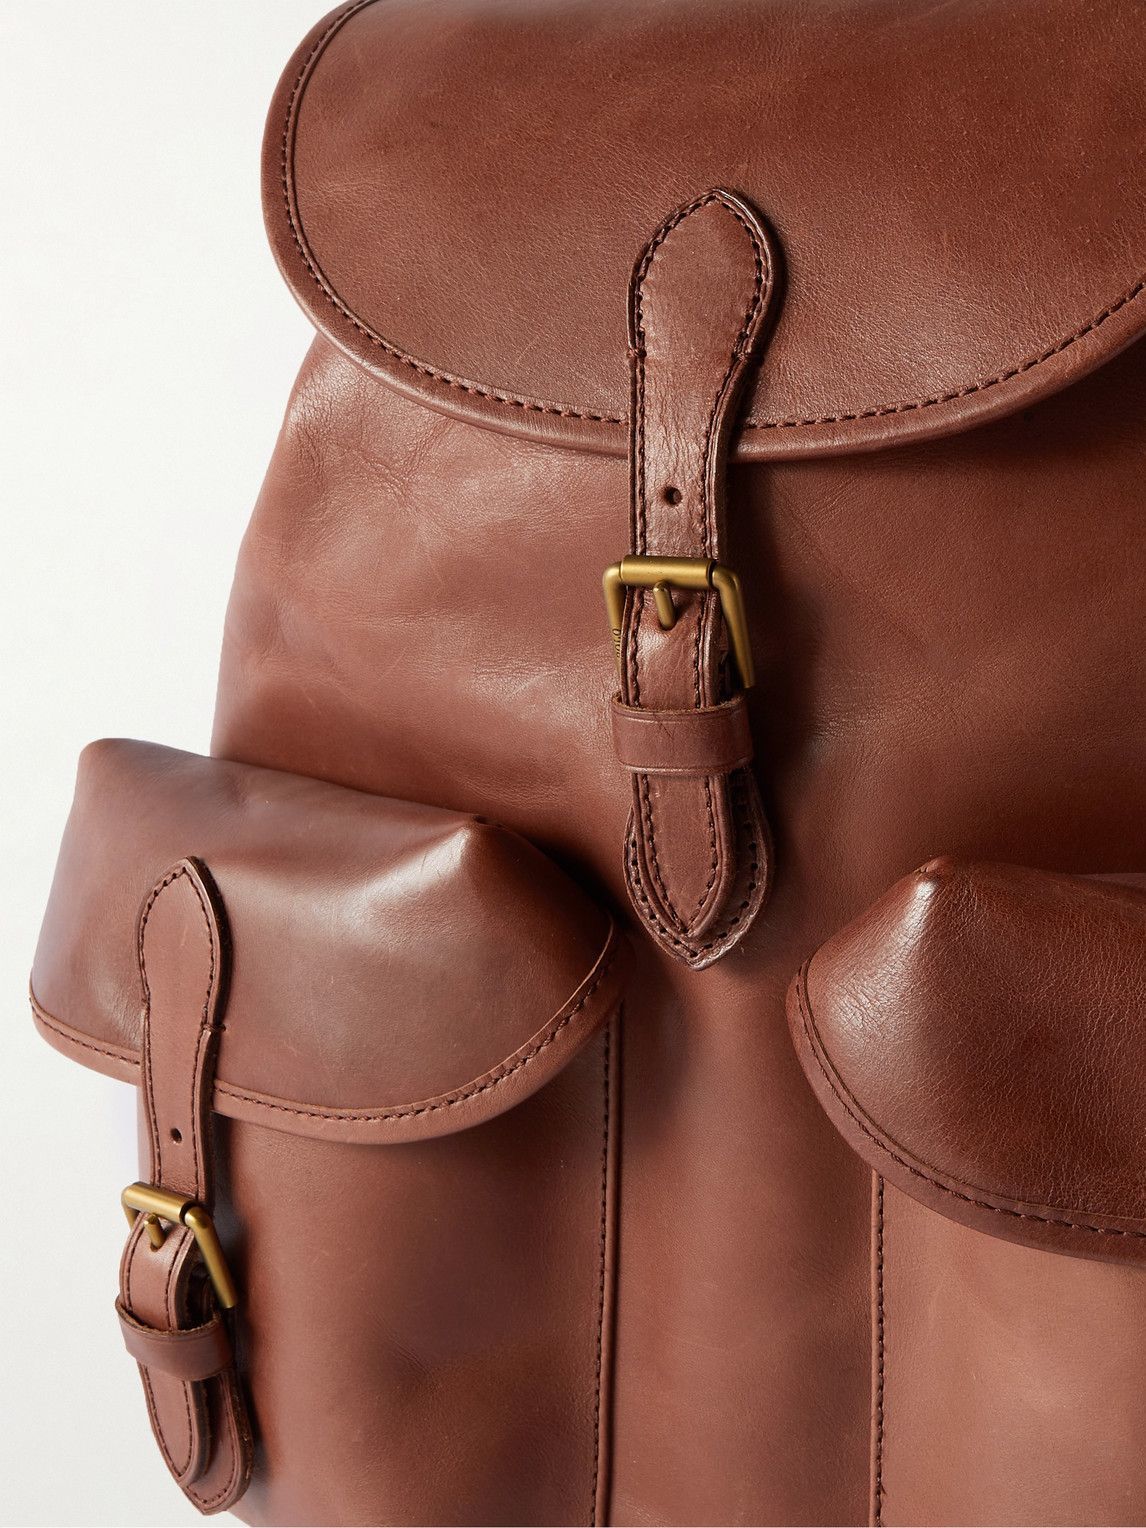 Polo Ralph Lauren - Leather Backpack